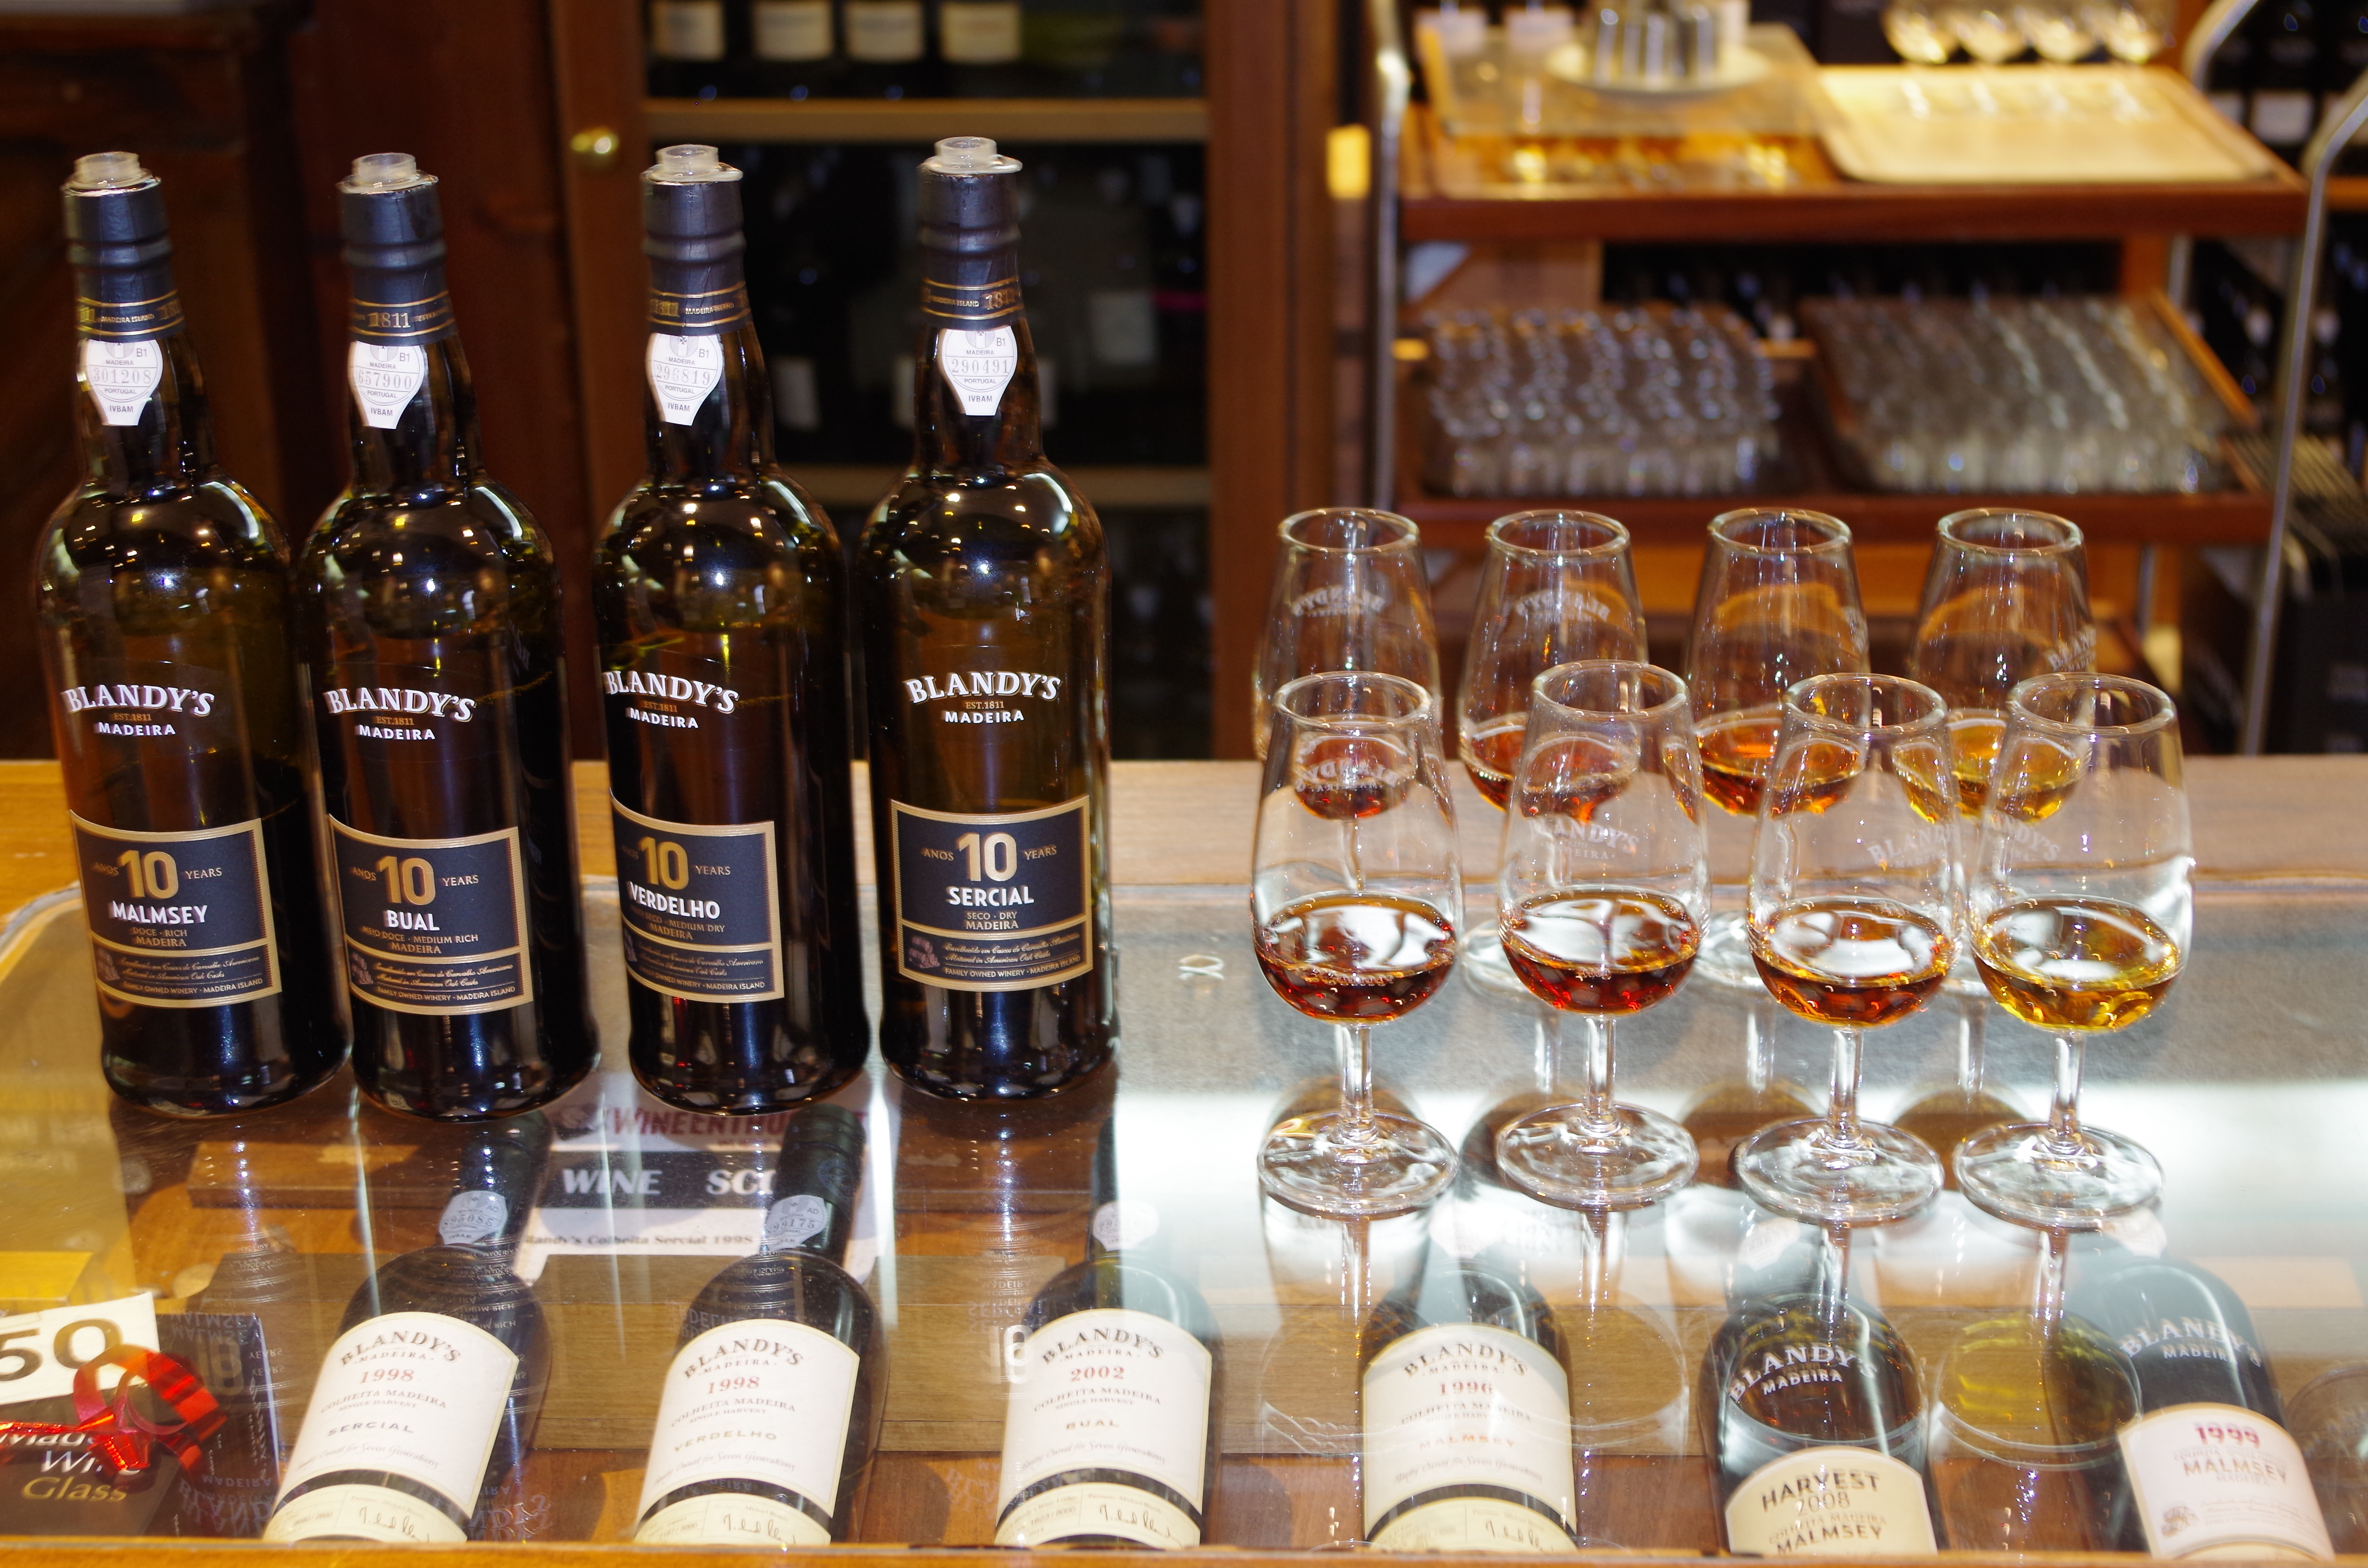 10 year old Madeira wines to taste